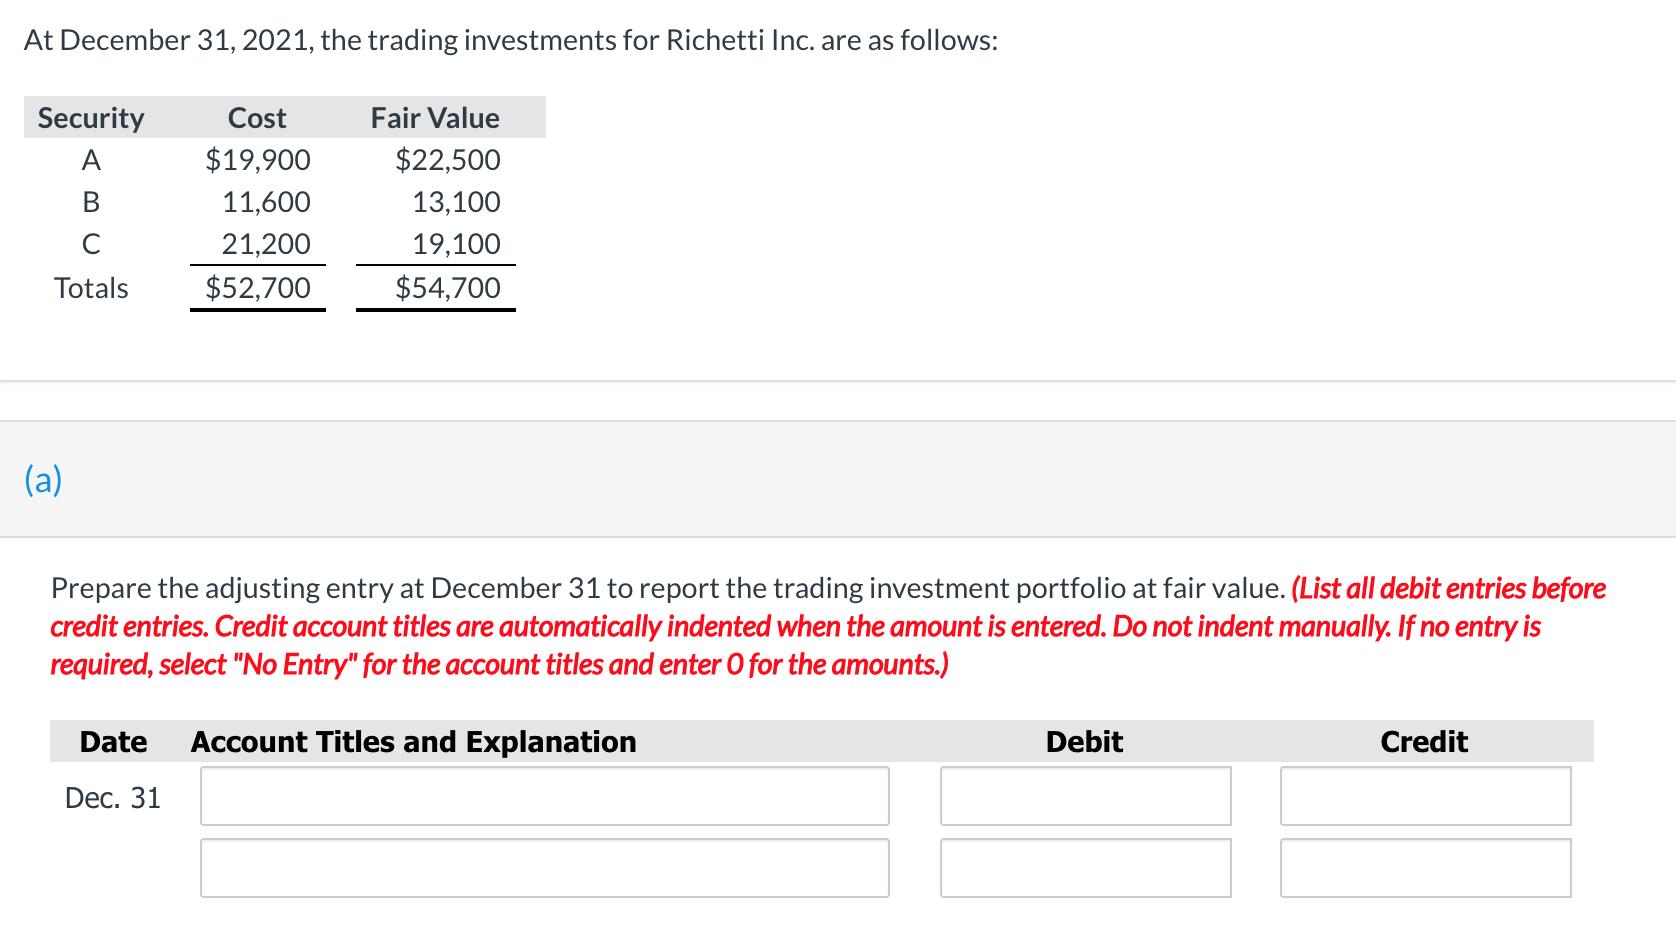 At December 31, 2021, the trading investments for Richetti Inc. are as follows:SecurityABCost$19,90011,60021,200$52,7